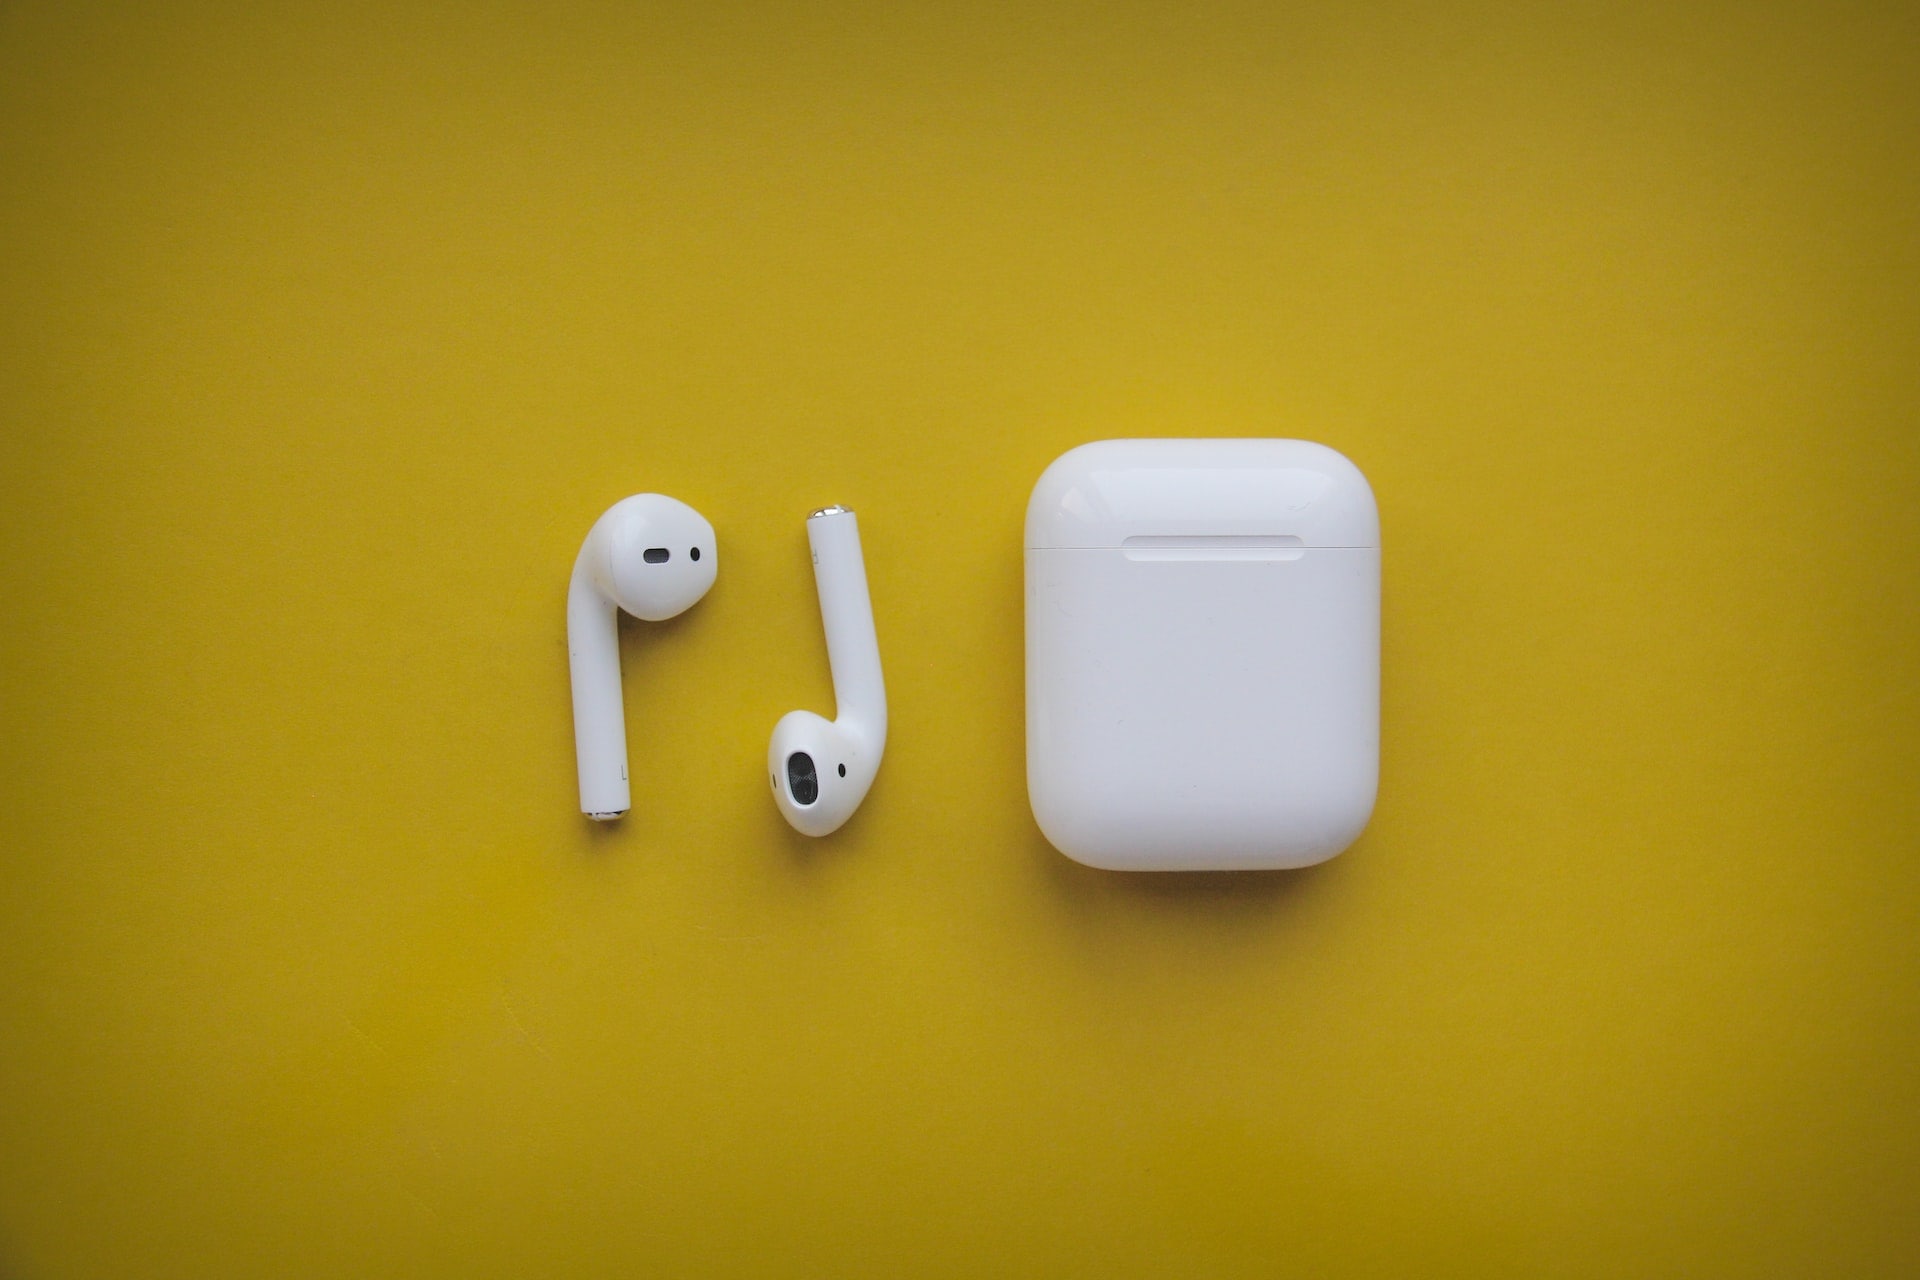 New AirPods and AirPods Max Launching in 2024, Updated AirPods Pro Coming  in 2025 - MacRumors